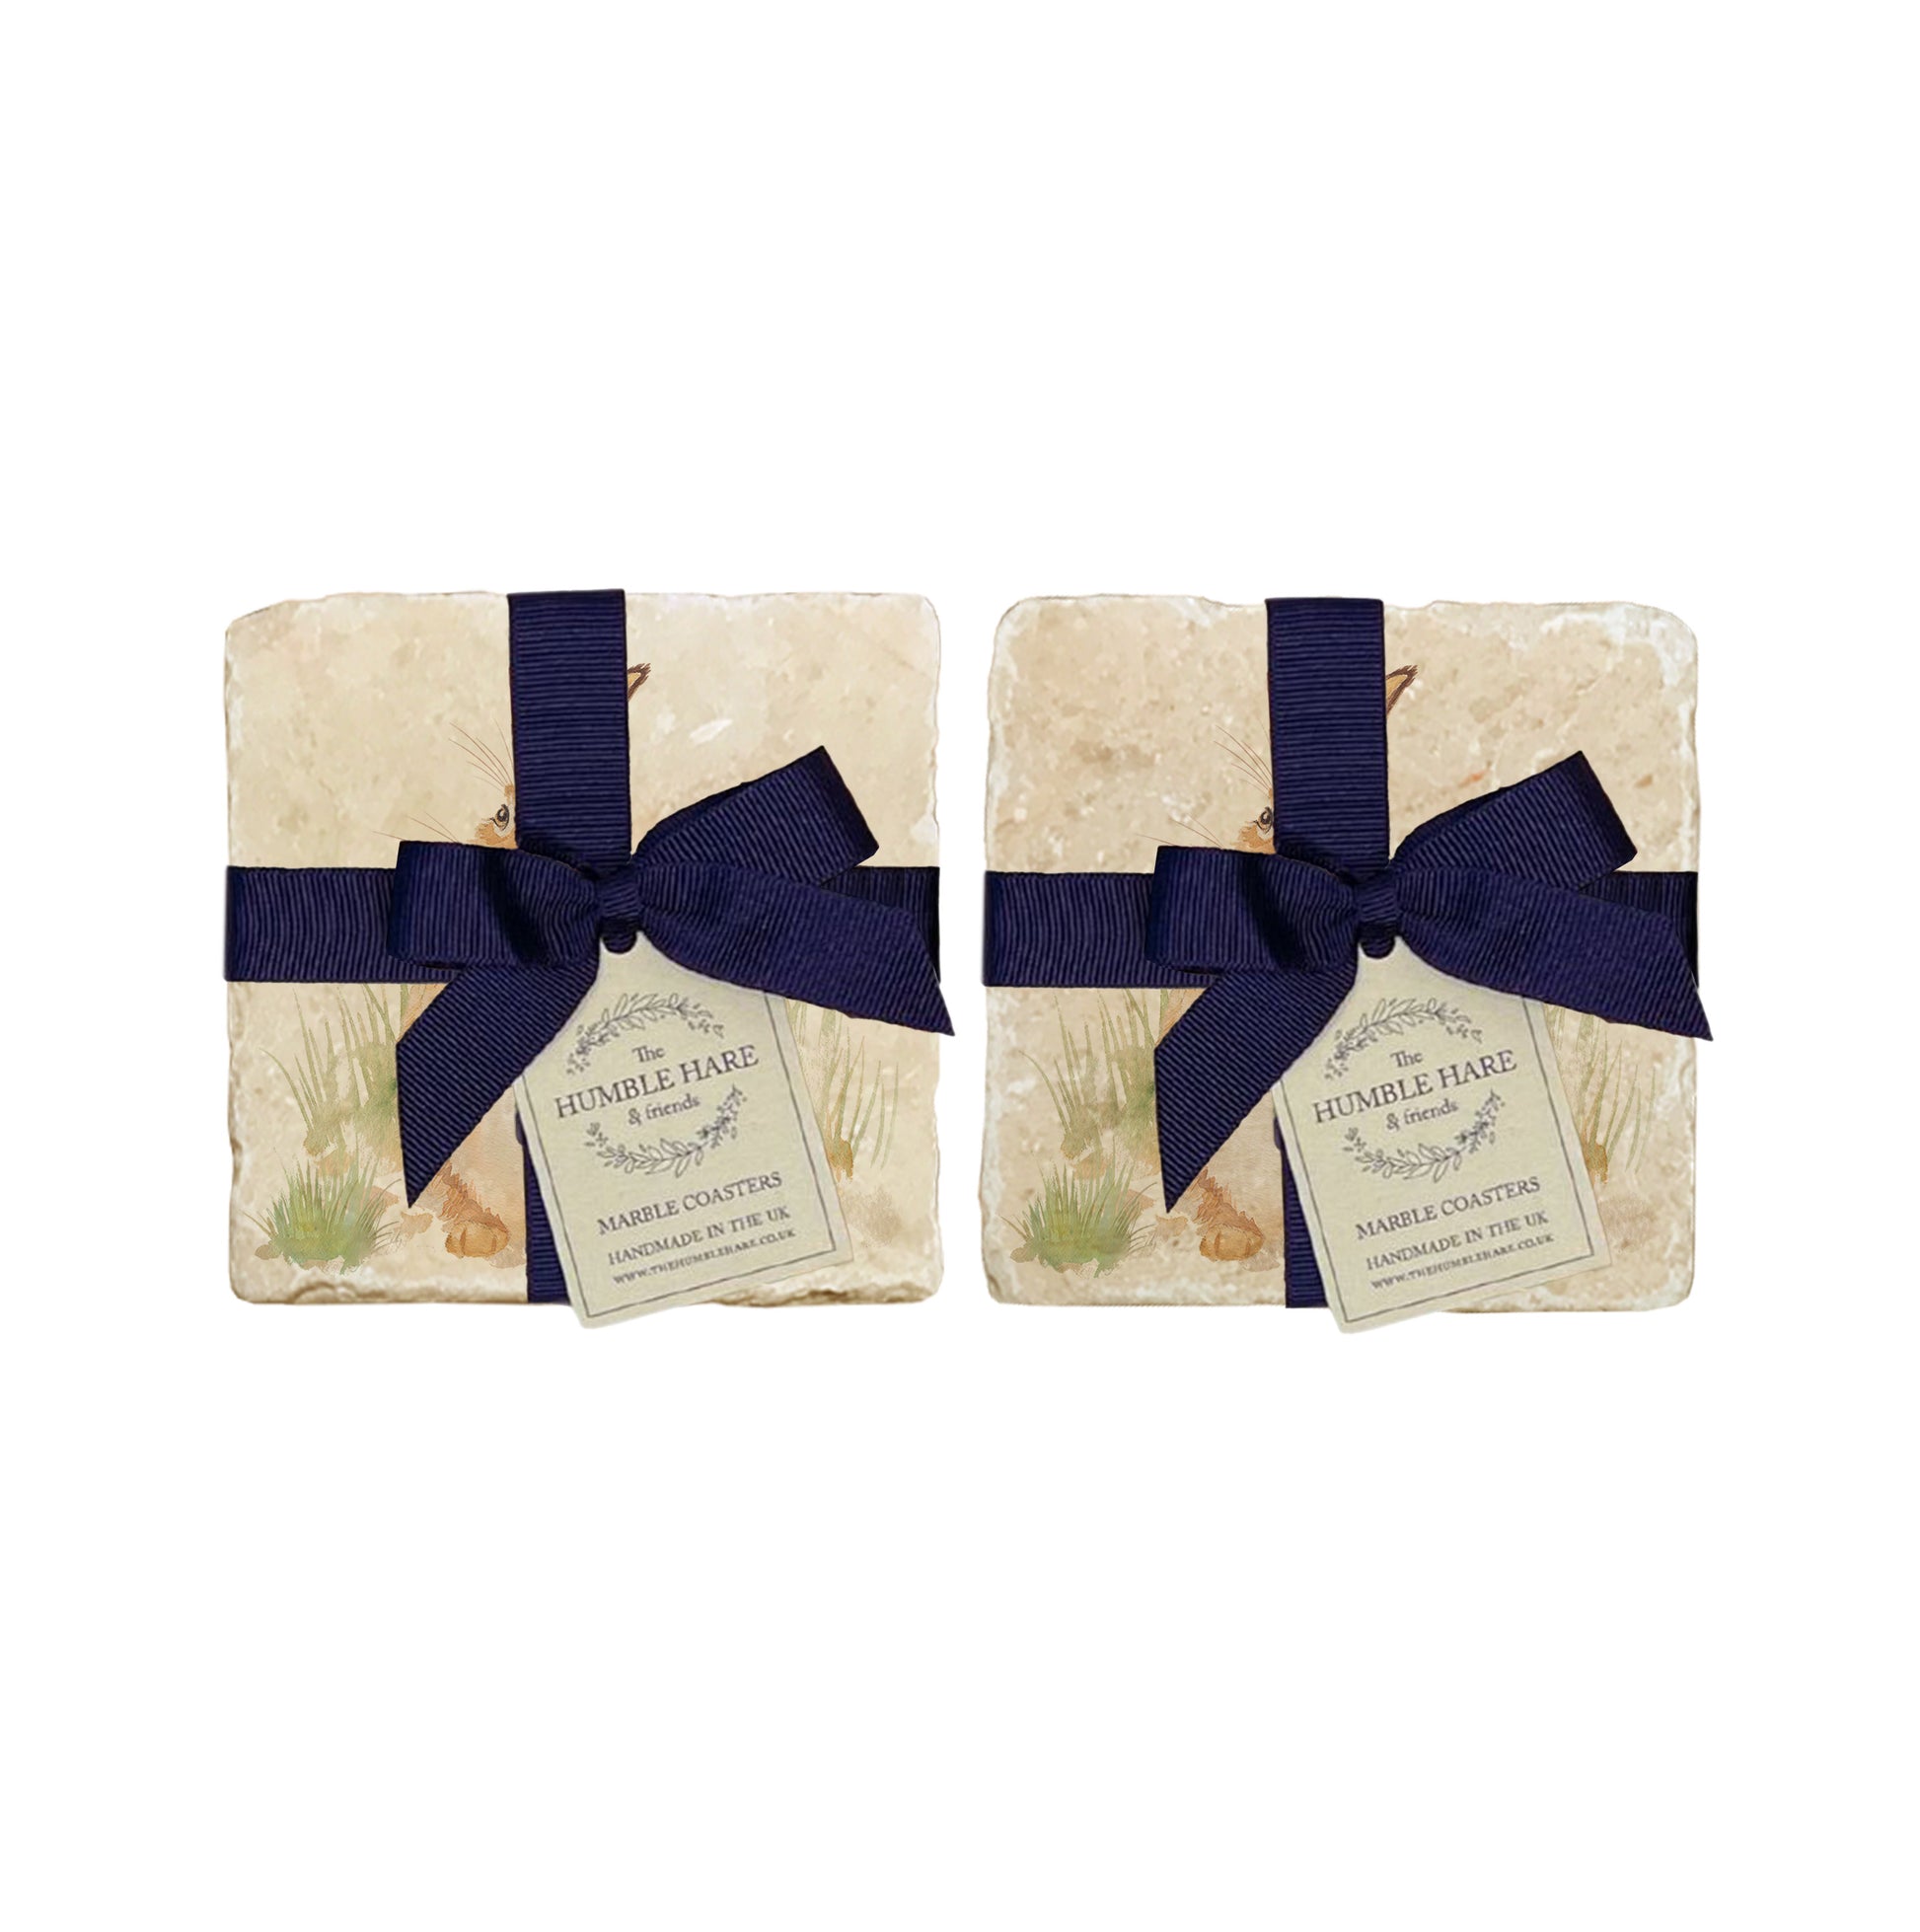 A set of 4 handmade marble coasters packaged in 2 pairs, with a luxurious dark blue bow and gift tag.